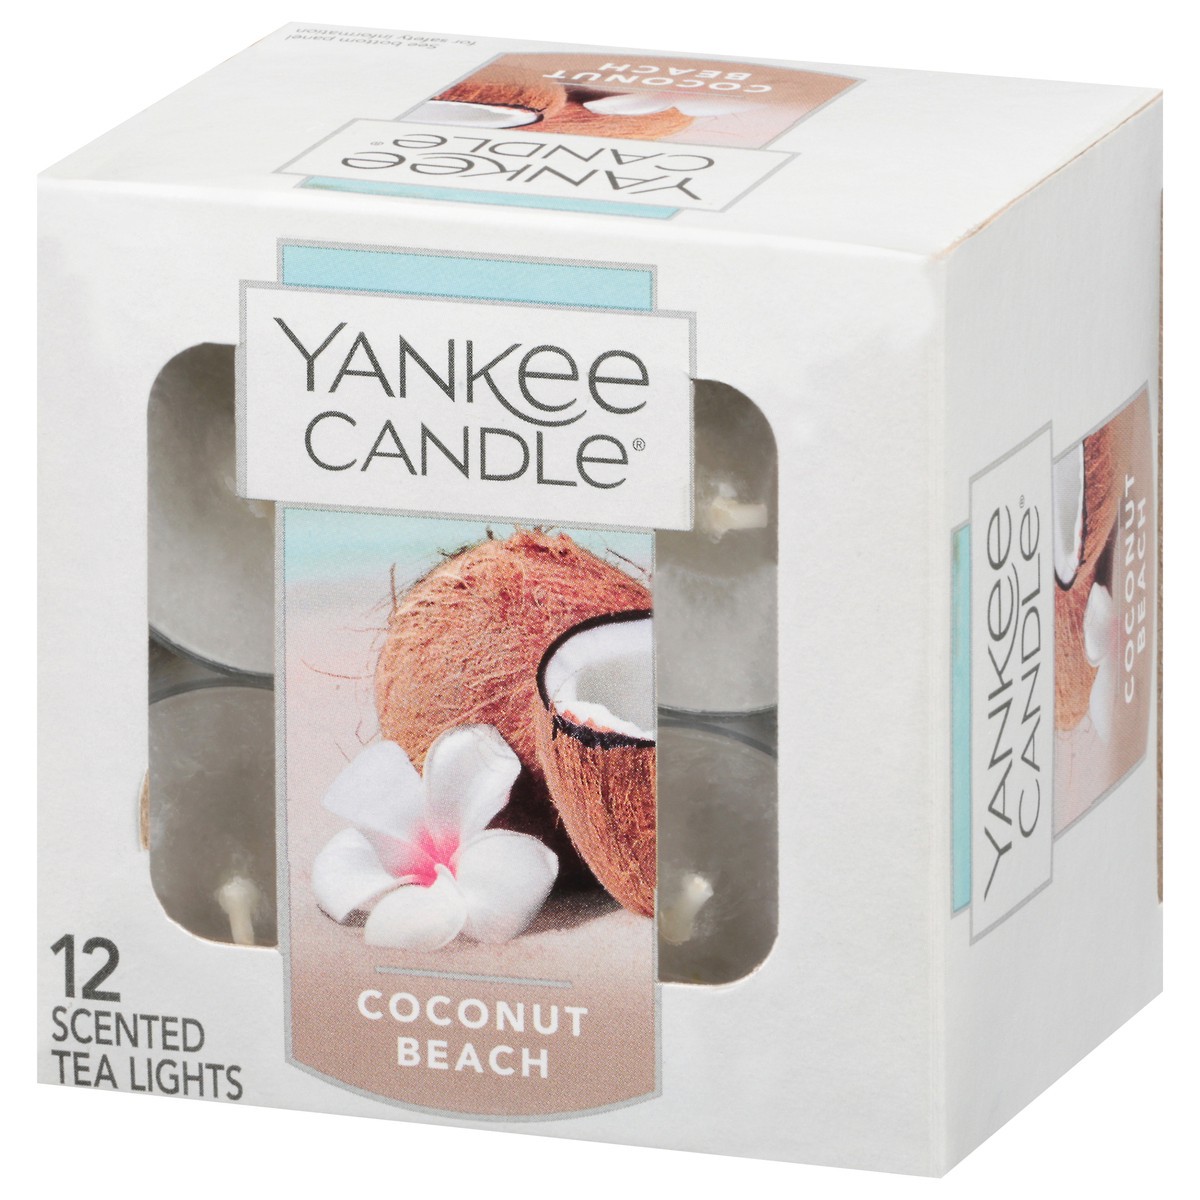 slide 2 of 11, Yankee Candle Scented Coconut Beach Tea Lights 12 Tea Lights 0.35 oz Packed, Unspecified 12 ea, 1 ct